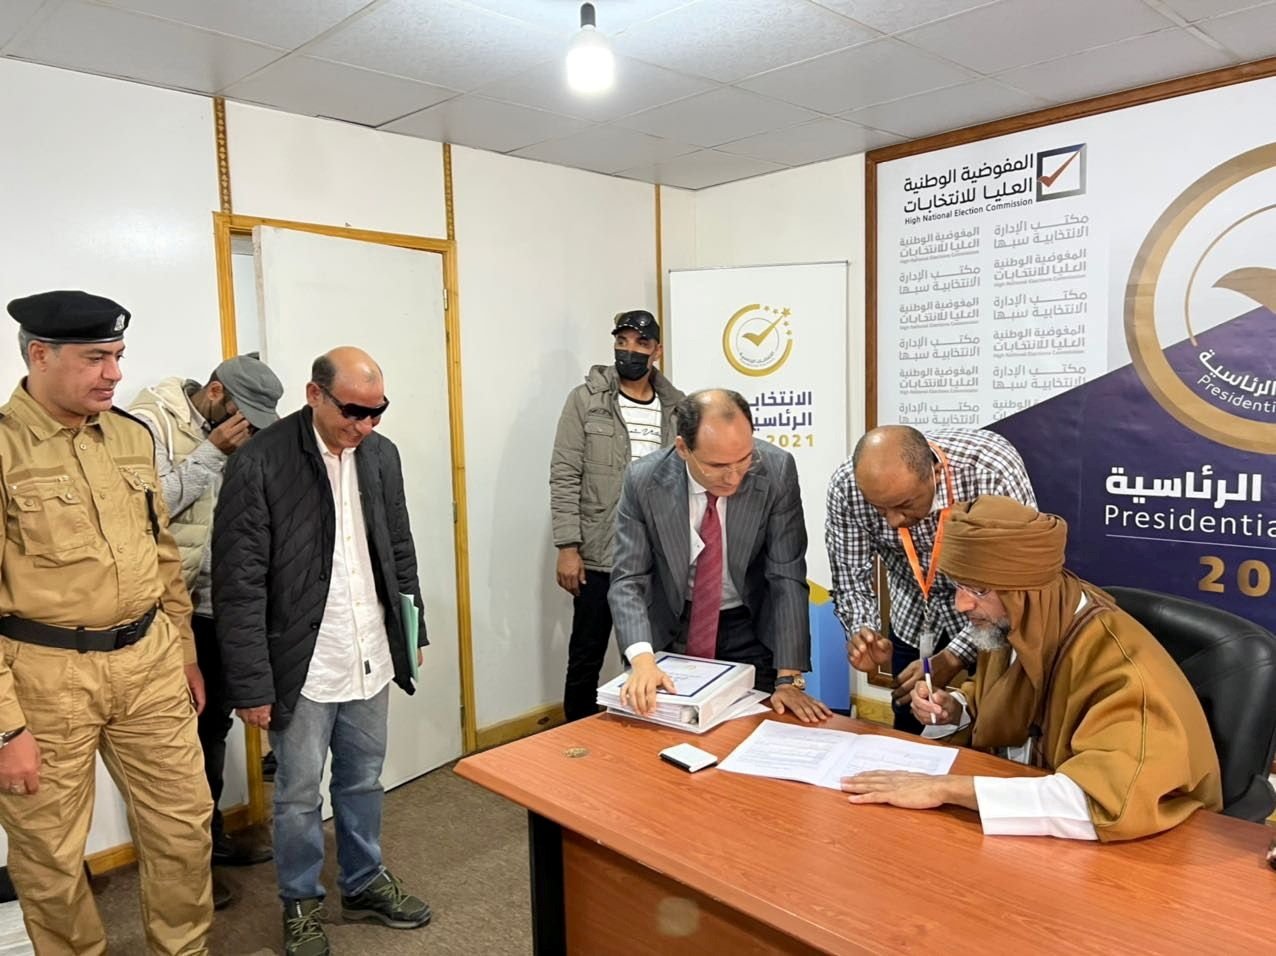 Seif al-Islam Gadhafi, son of Libya&#039;s former leader Moammar Gadhafi, registers as a presidential candidate for the Dec. 24 election, at the registration center in the southern town of Sebha, Libya, Nov. 14, 2021. (Reuters Photo)